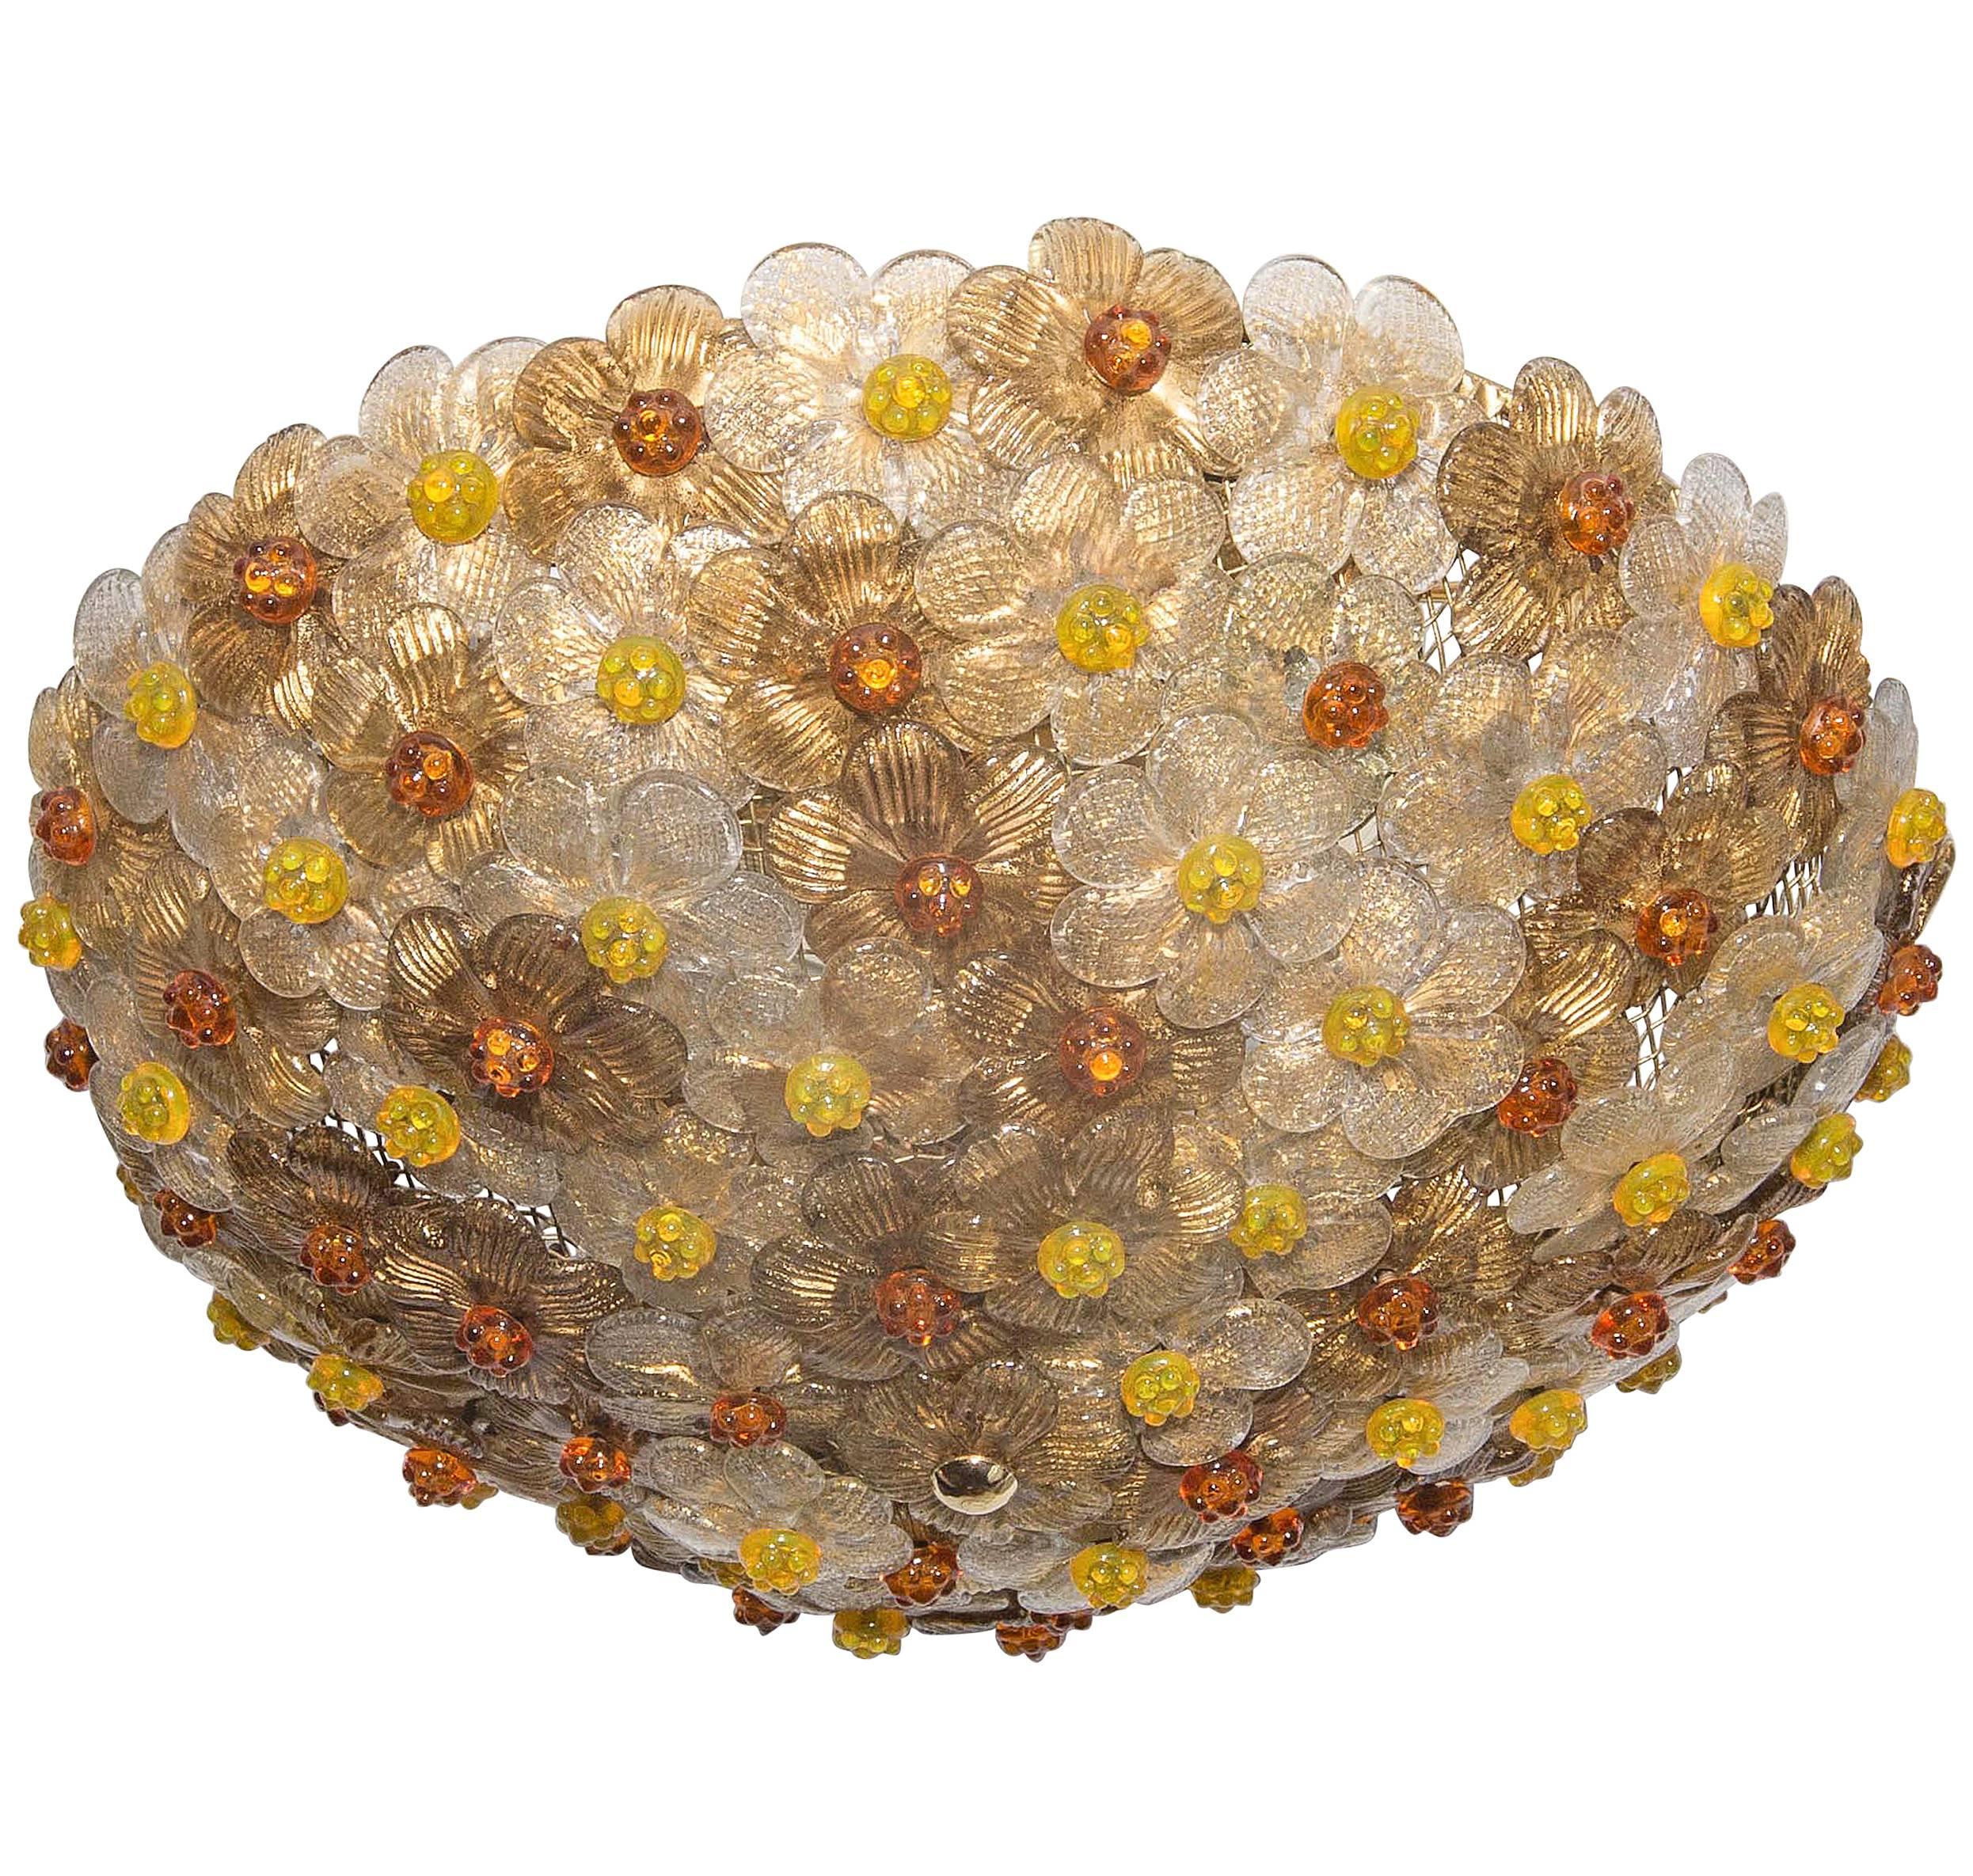 Dome Form Flush Mount Composed of Multiple Amber and Gold Glass Flowers